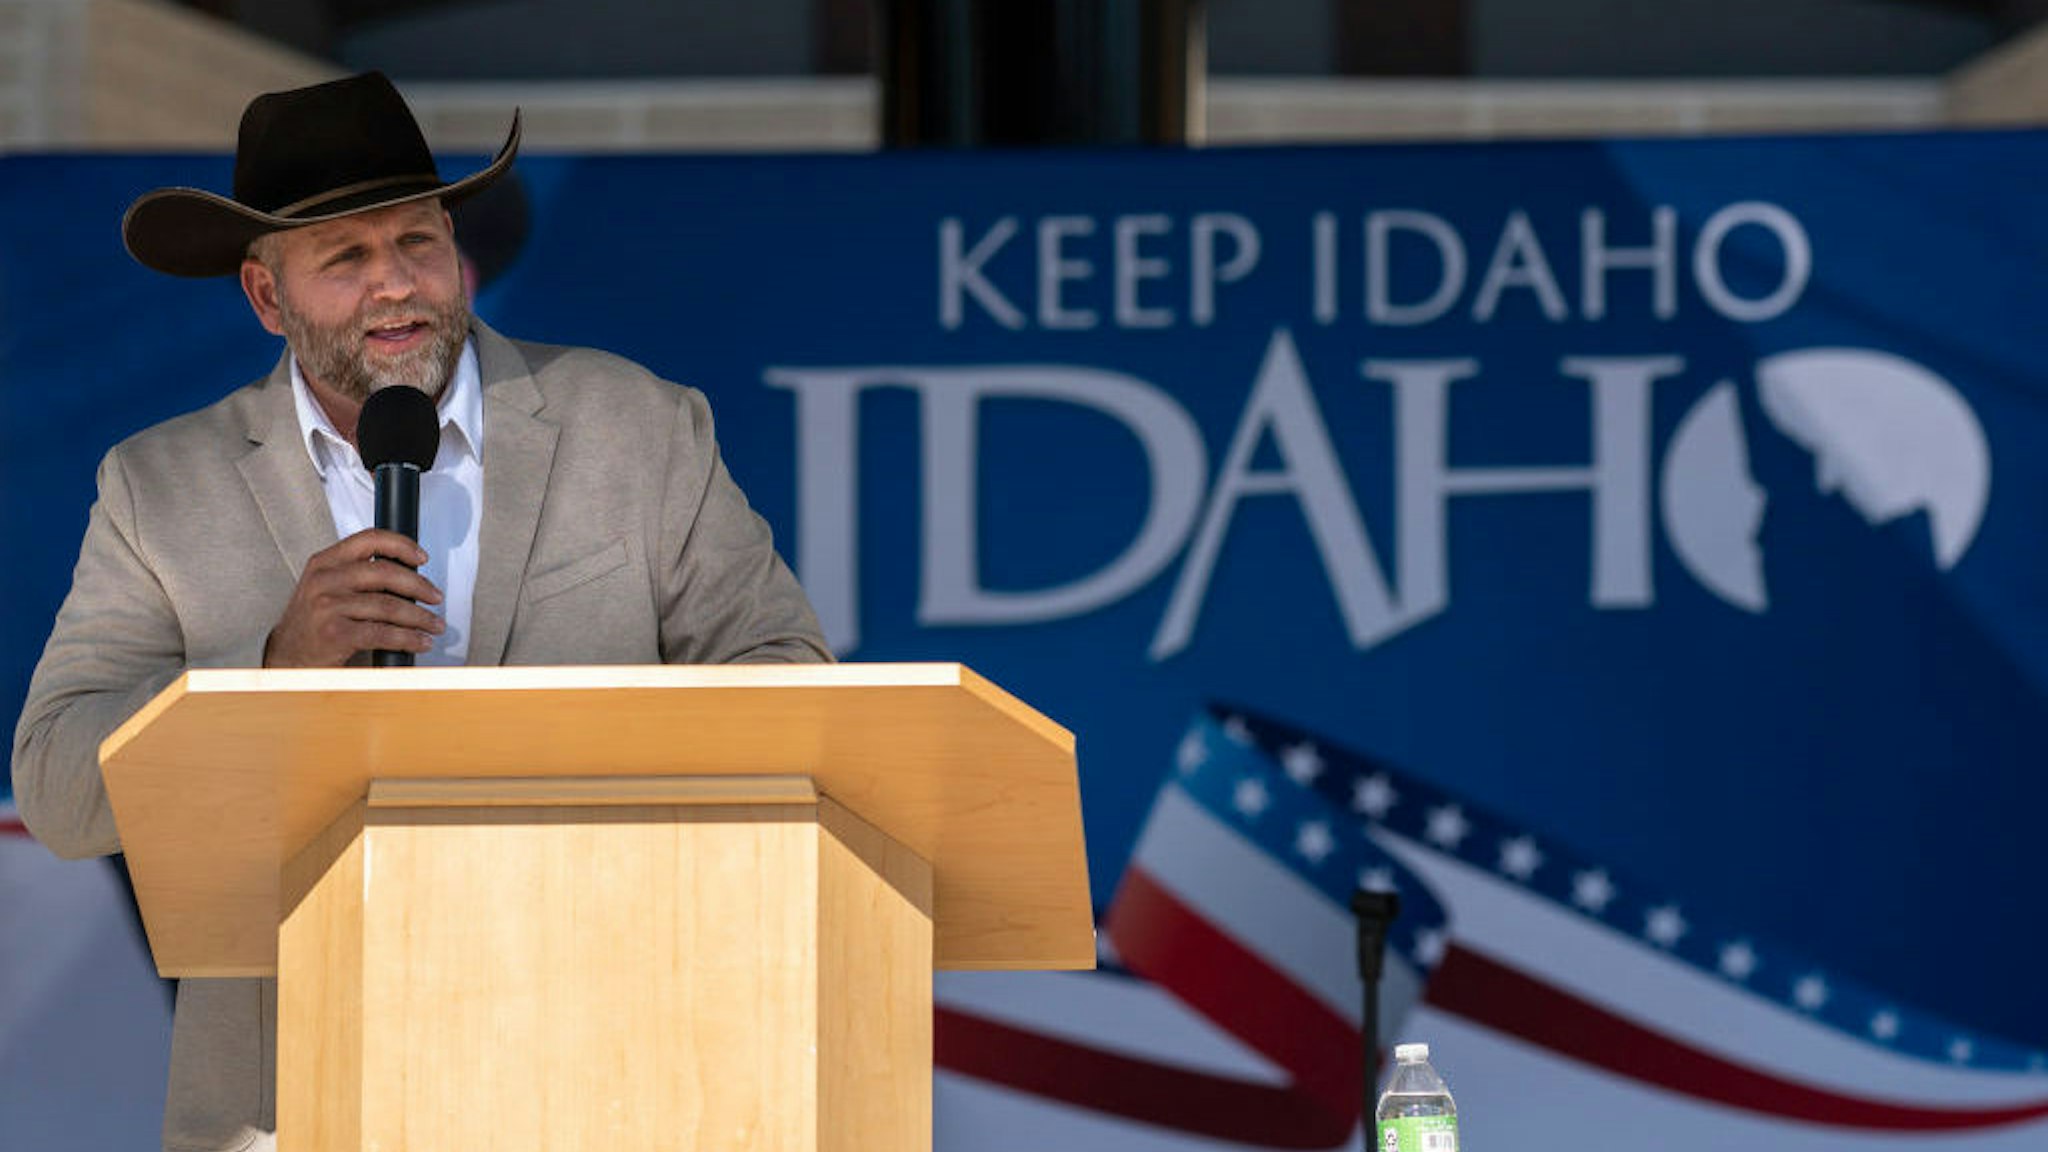 BOISE, ID - JUNE 19: Ammon Bundy announces his candidacy for governor of Idaho during a campaign event on June 19, 2021 in Boise, Idaho. Bundy, best known for his 41 day armed occupation of the Oregon Malhuere Wildlife Refuge in 2016, told the crowd he decided to run for governor while awaiting trial in federal prison. (Photo by Nathan Howard/Getty Images)